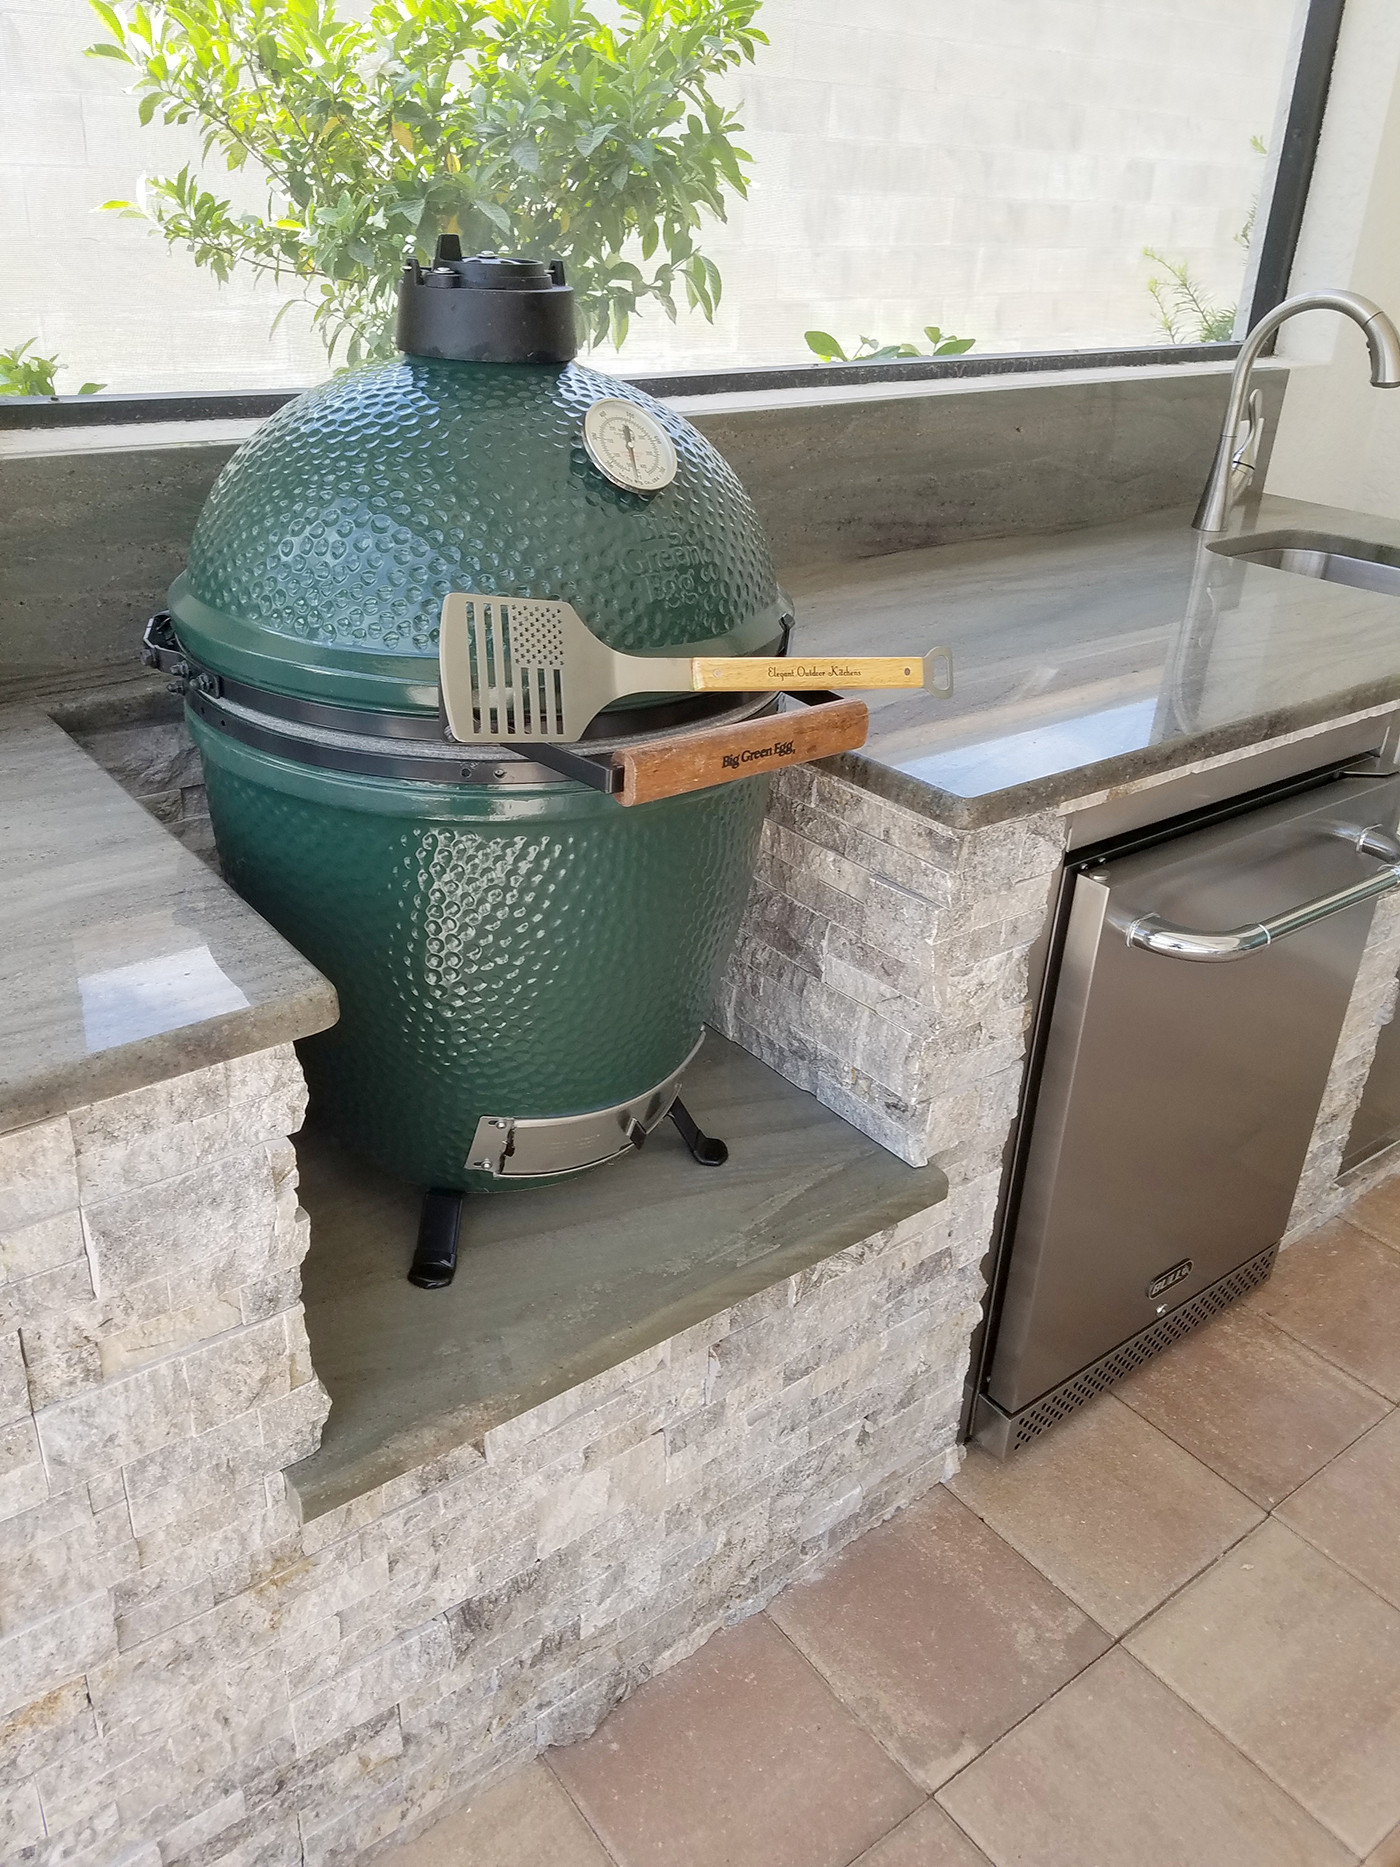 Outdoor Kitchen With Green Egg
 The Big Green Egg Outdoor Kitchen Elegant Outdoor Kitchens